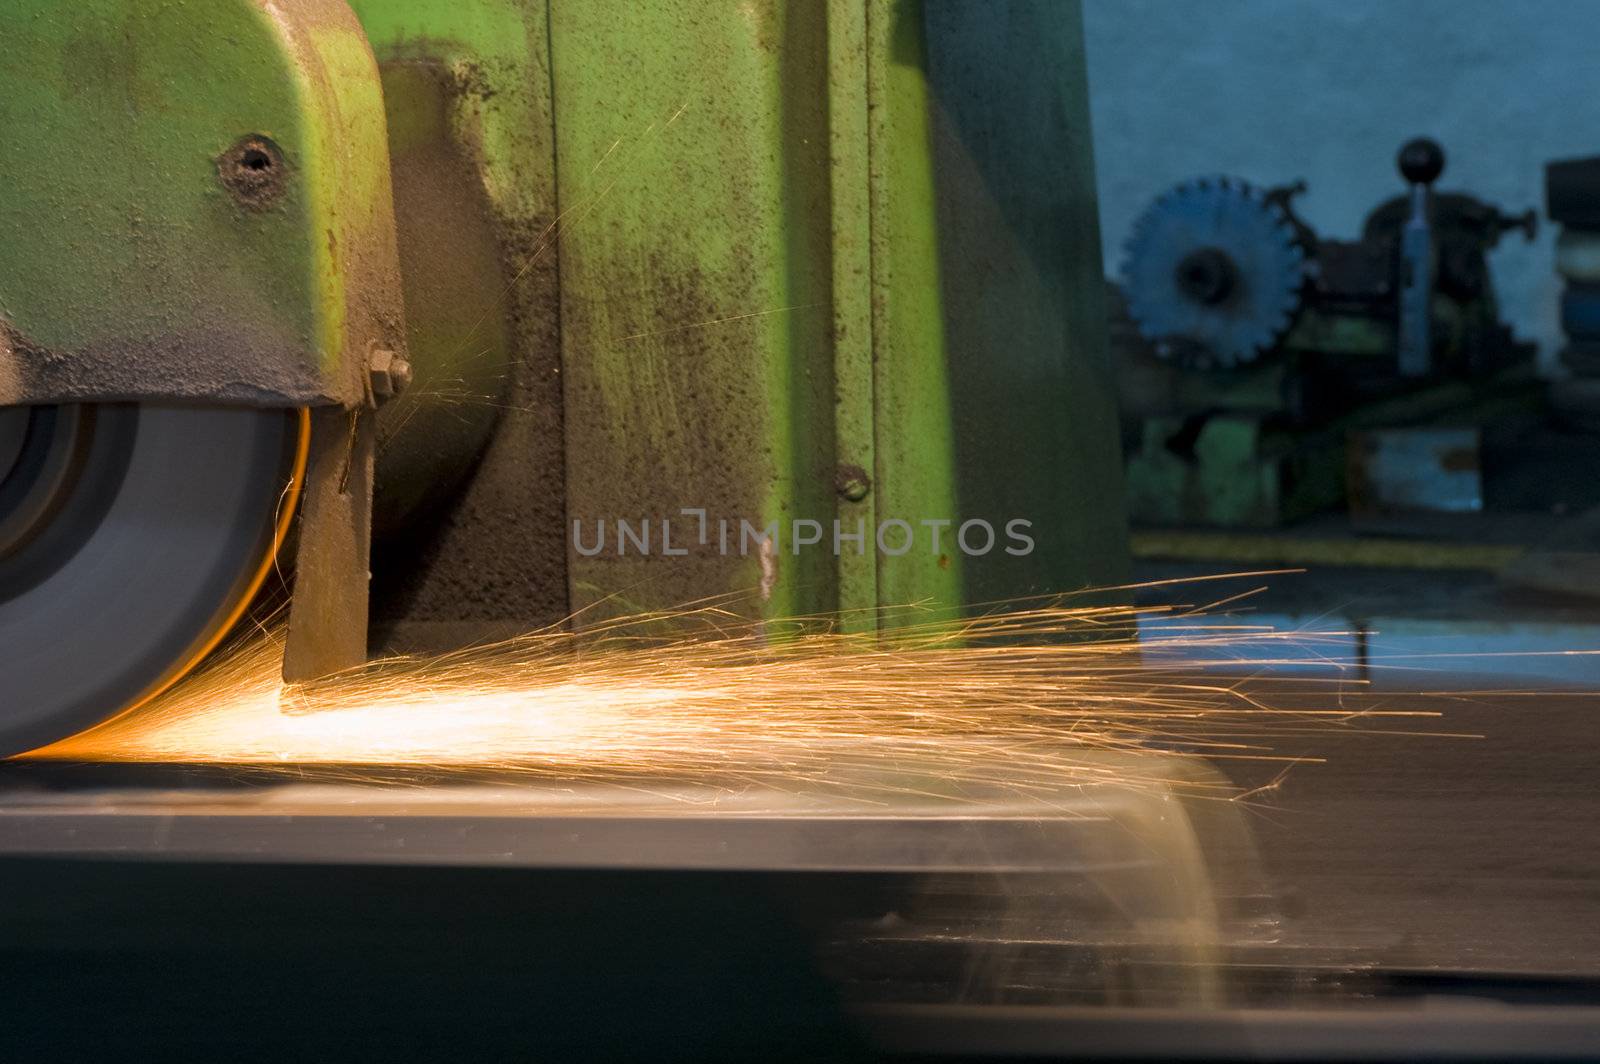 grinder with sparks by cherrymer